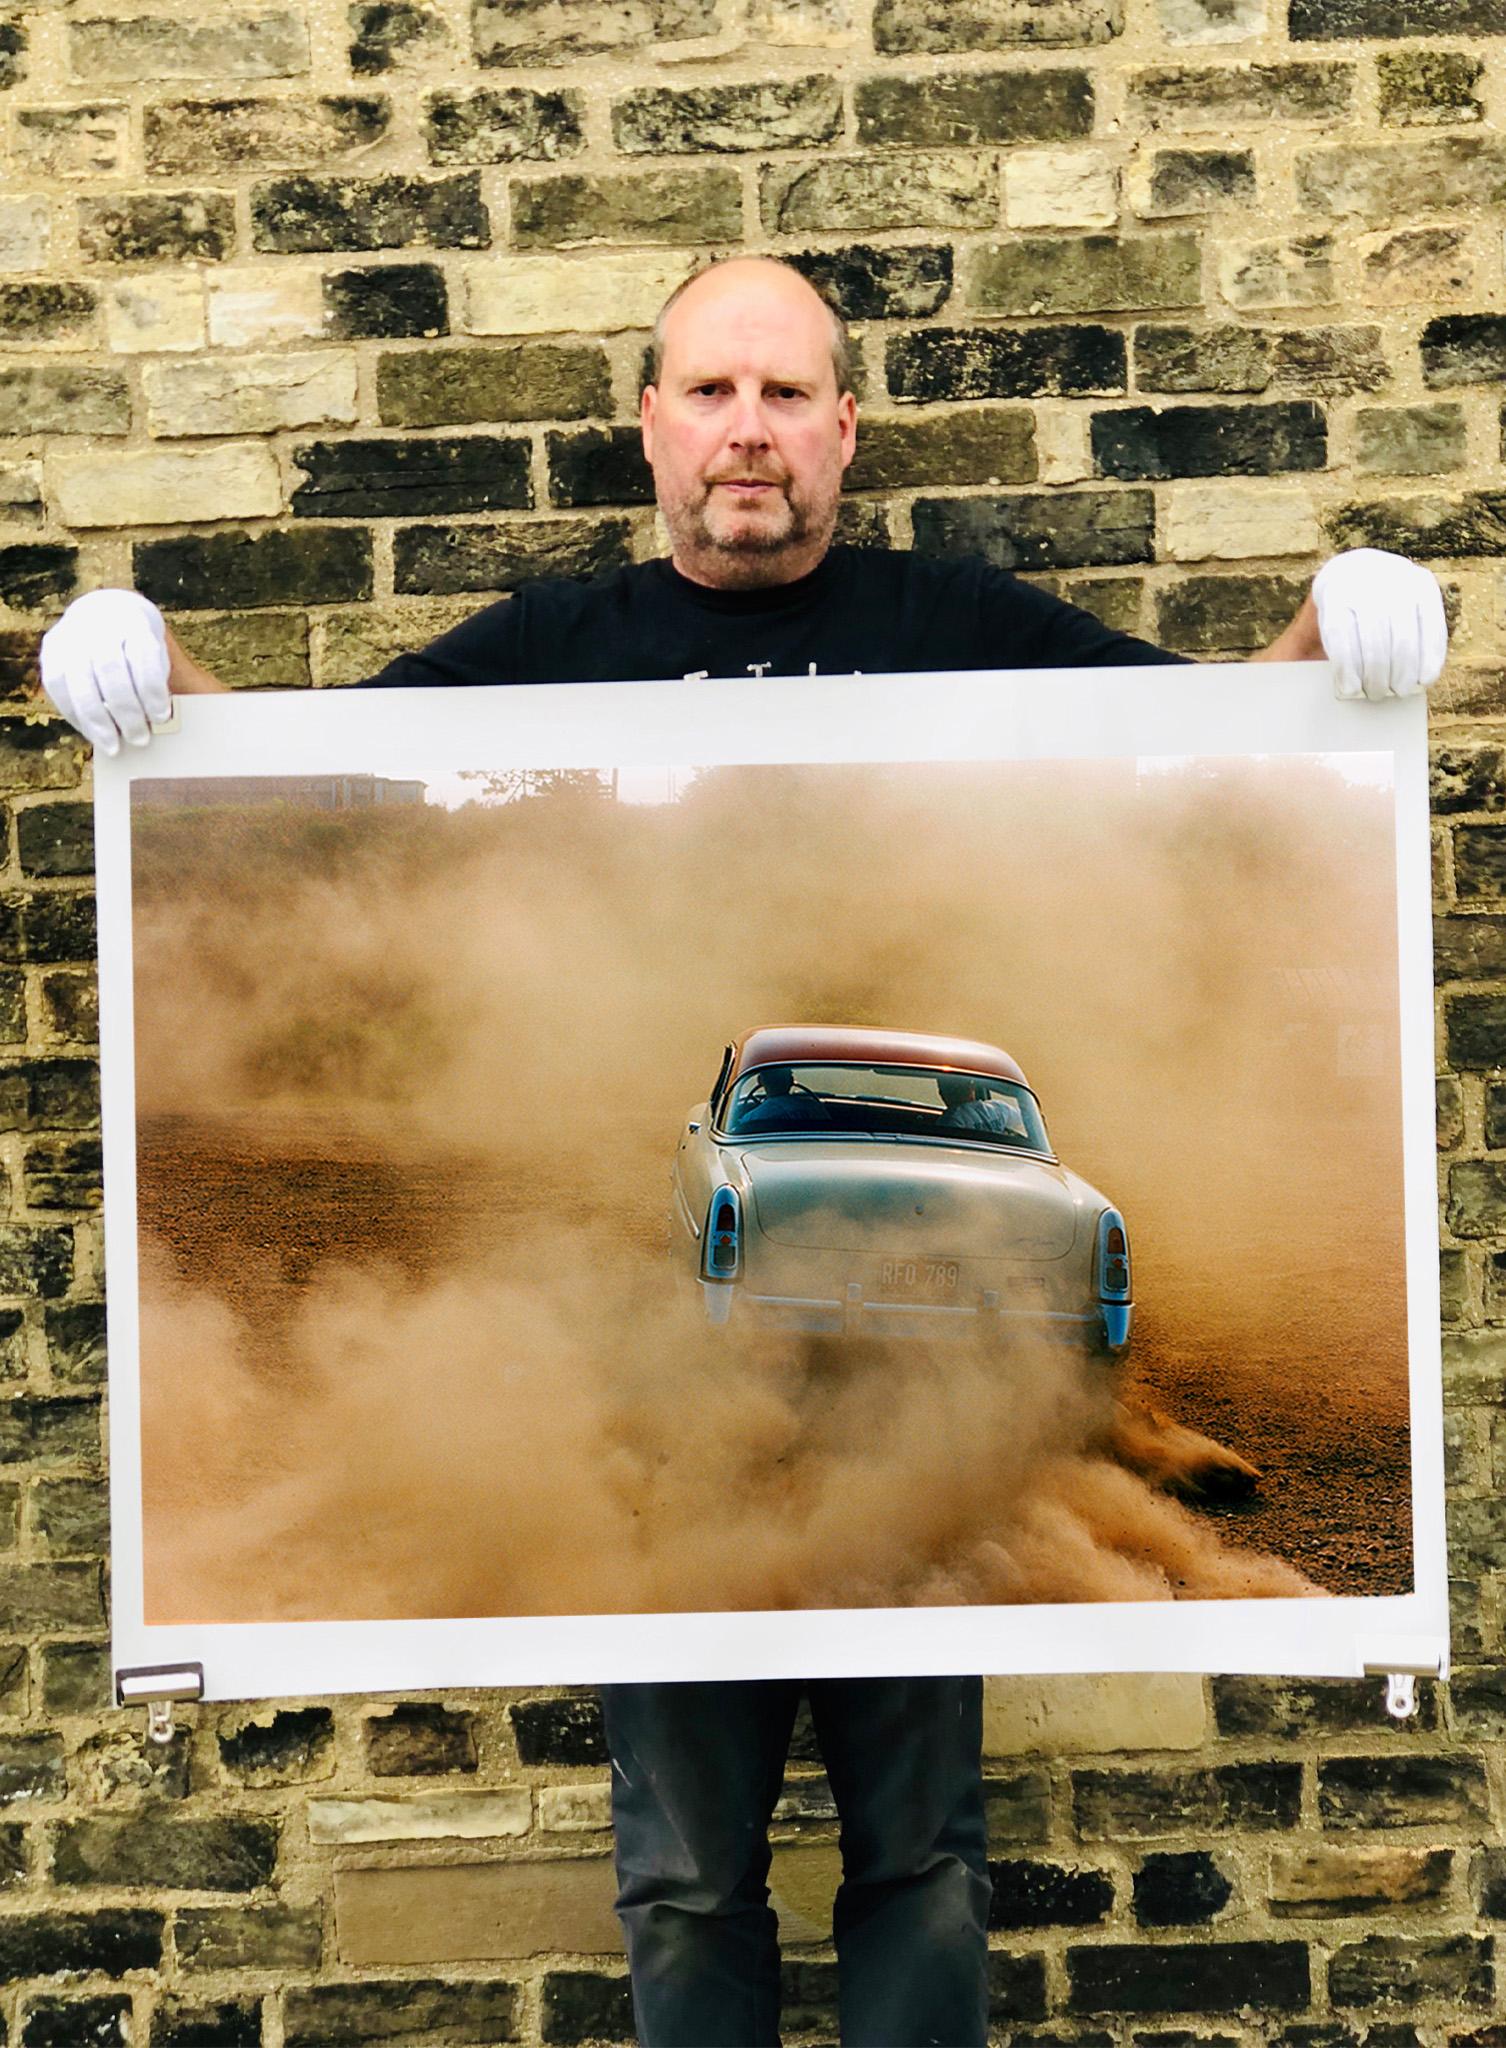 Mercury in the Dust, Hemsby, Norfolk - Car on a beach color photography - Photograph by Richard Heeps